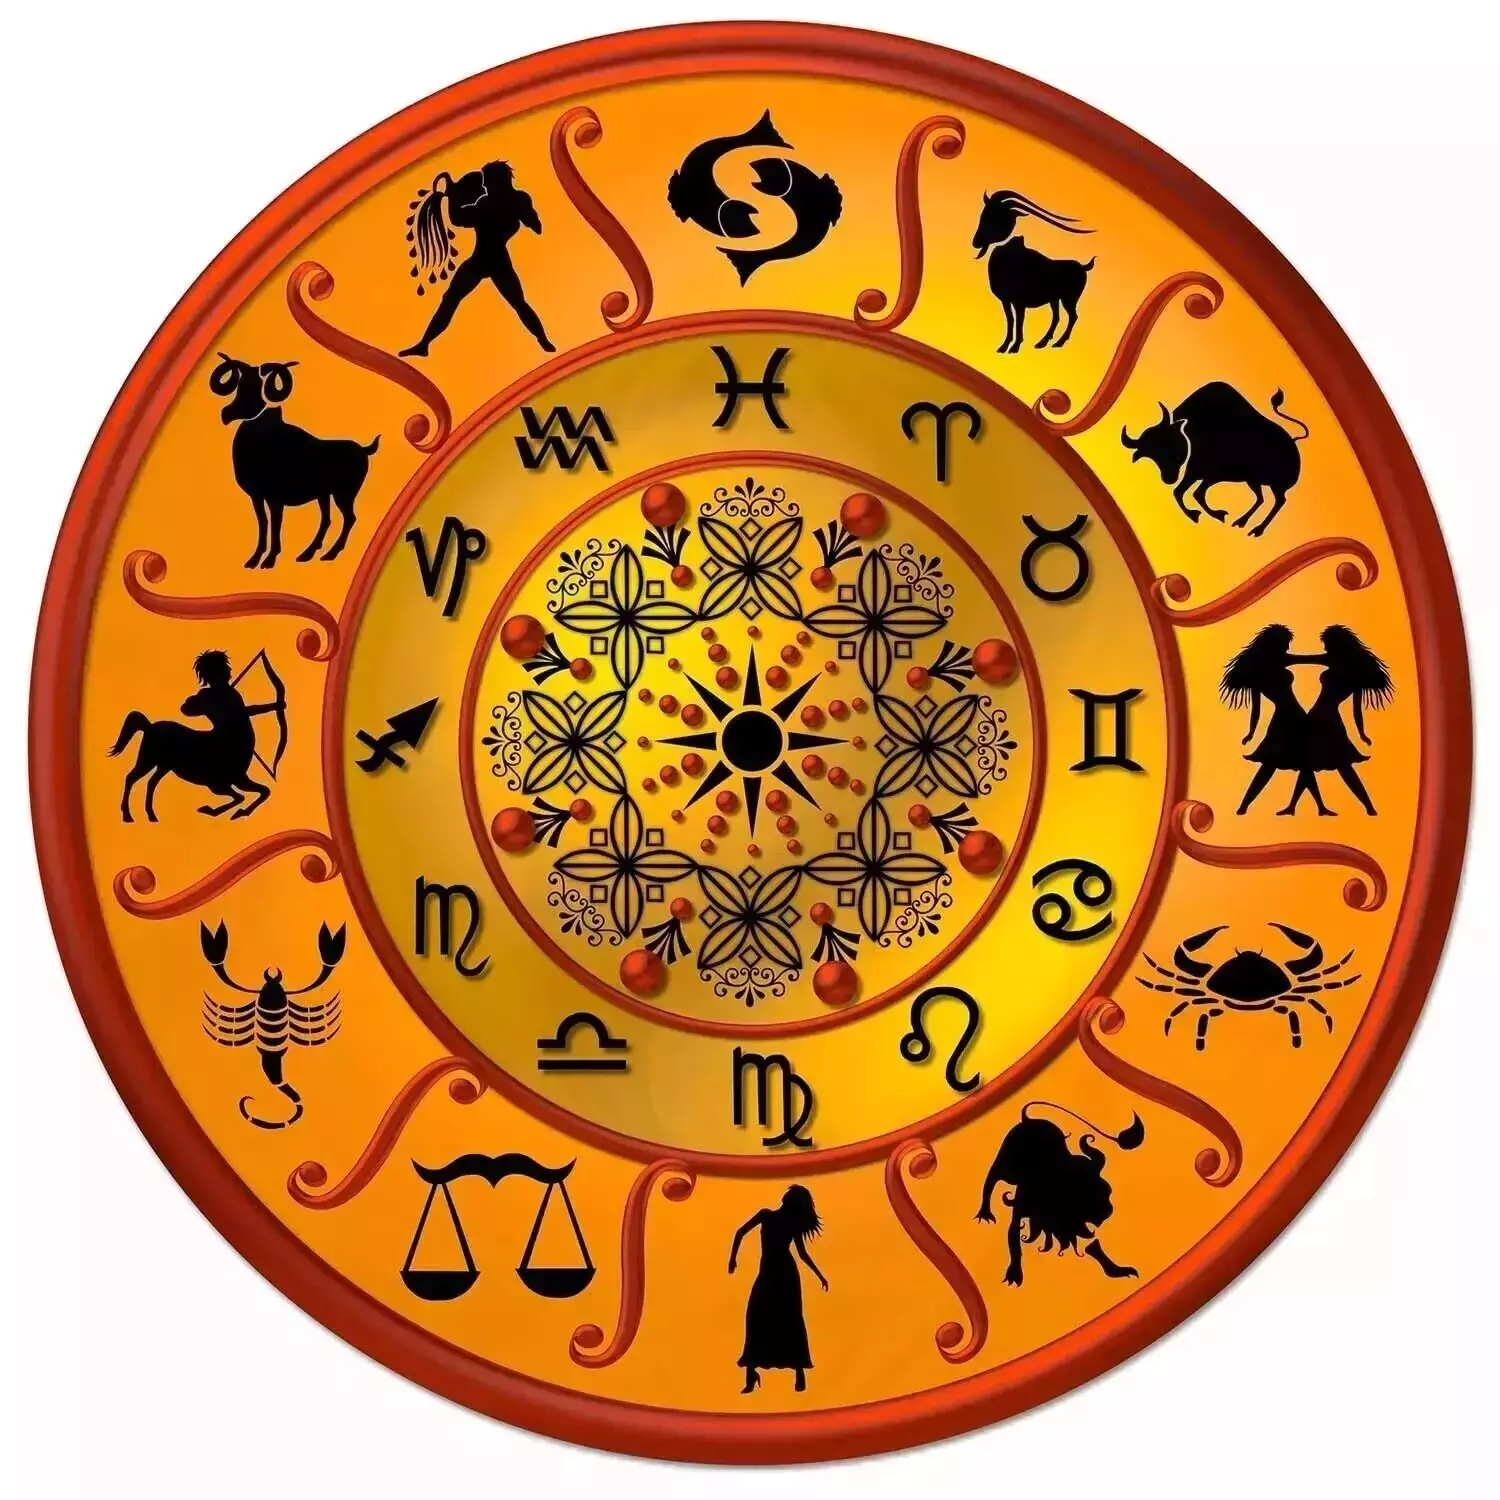 29 February  – Know your todays horoscope